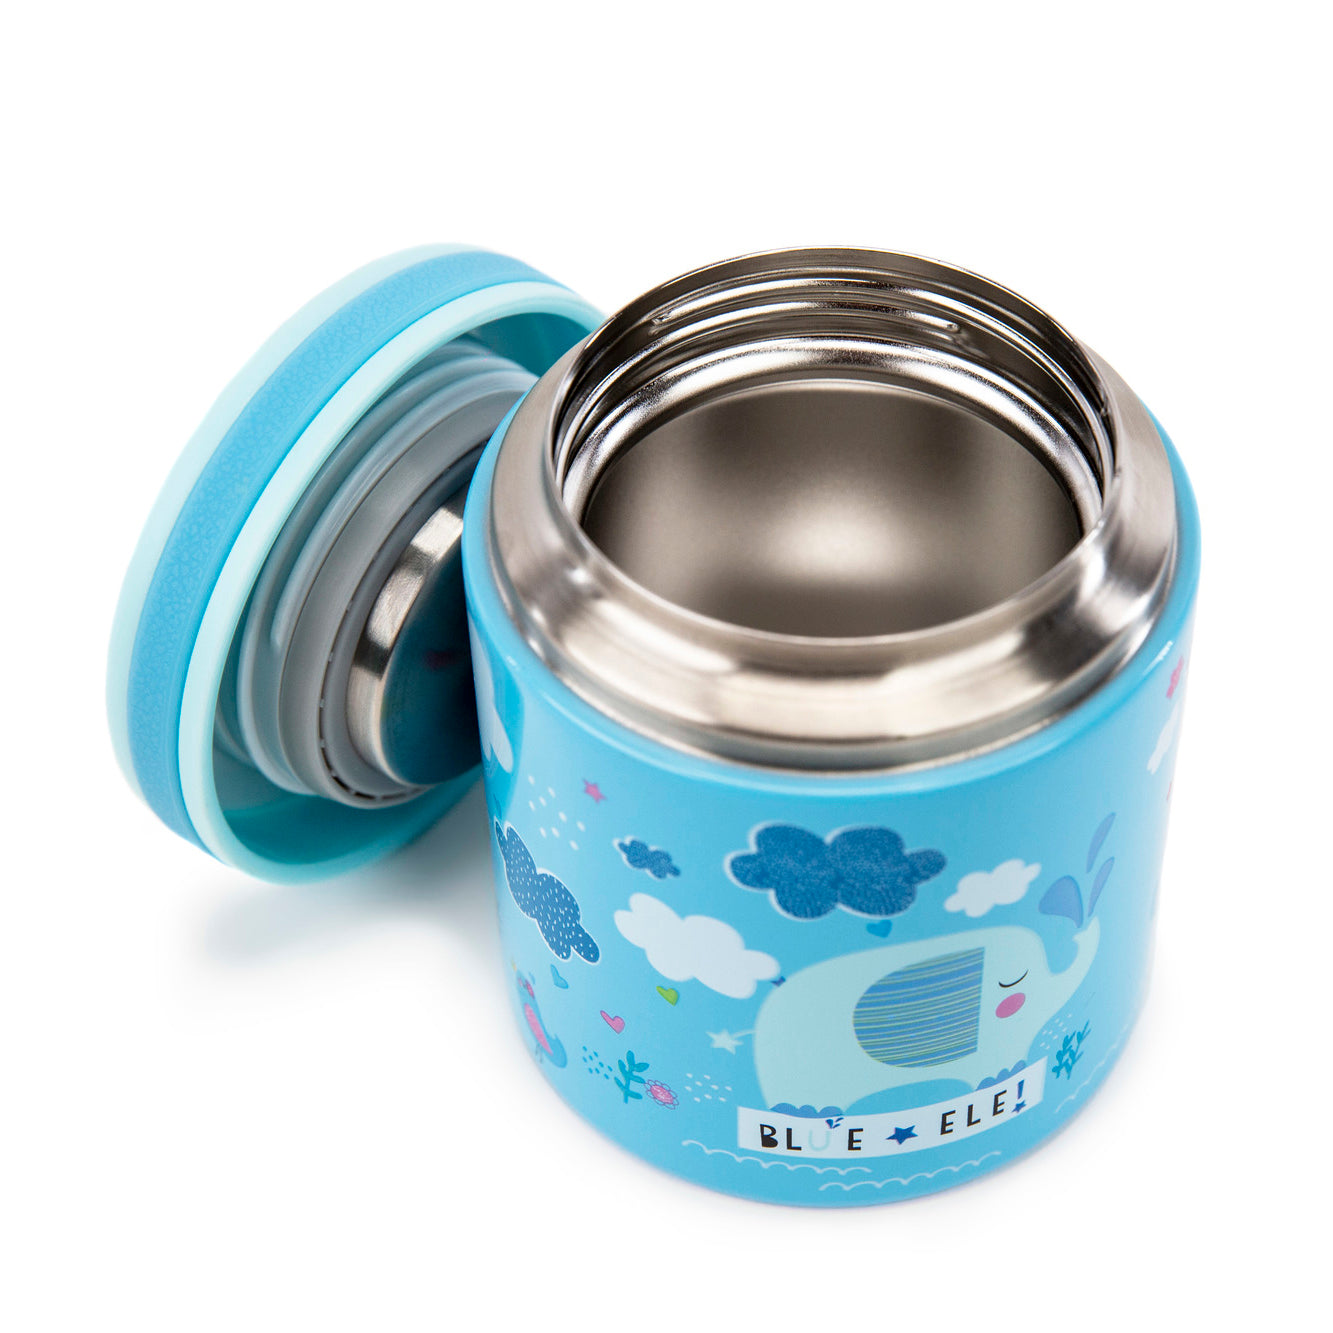 Blue Ele Food Jar with Easy-Grip Lid and Folding Spoon( best sel